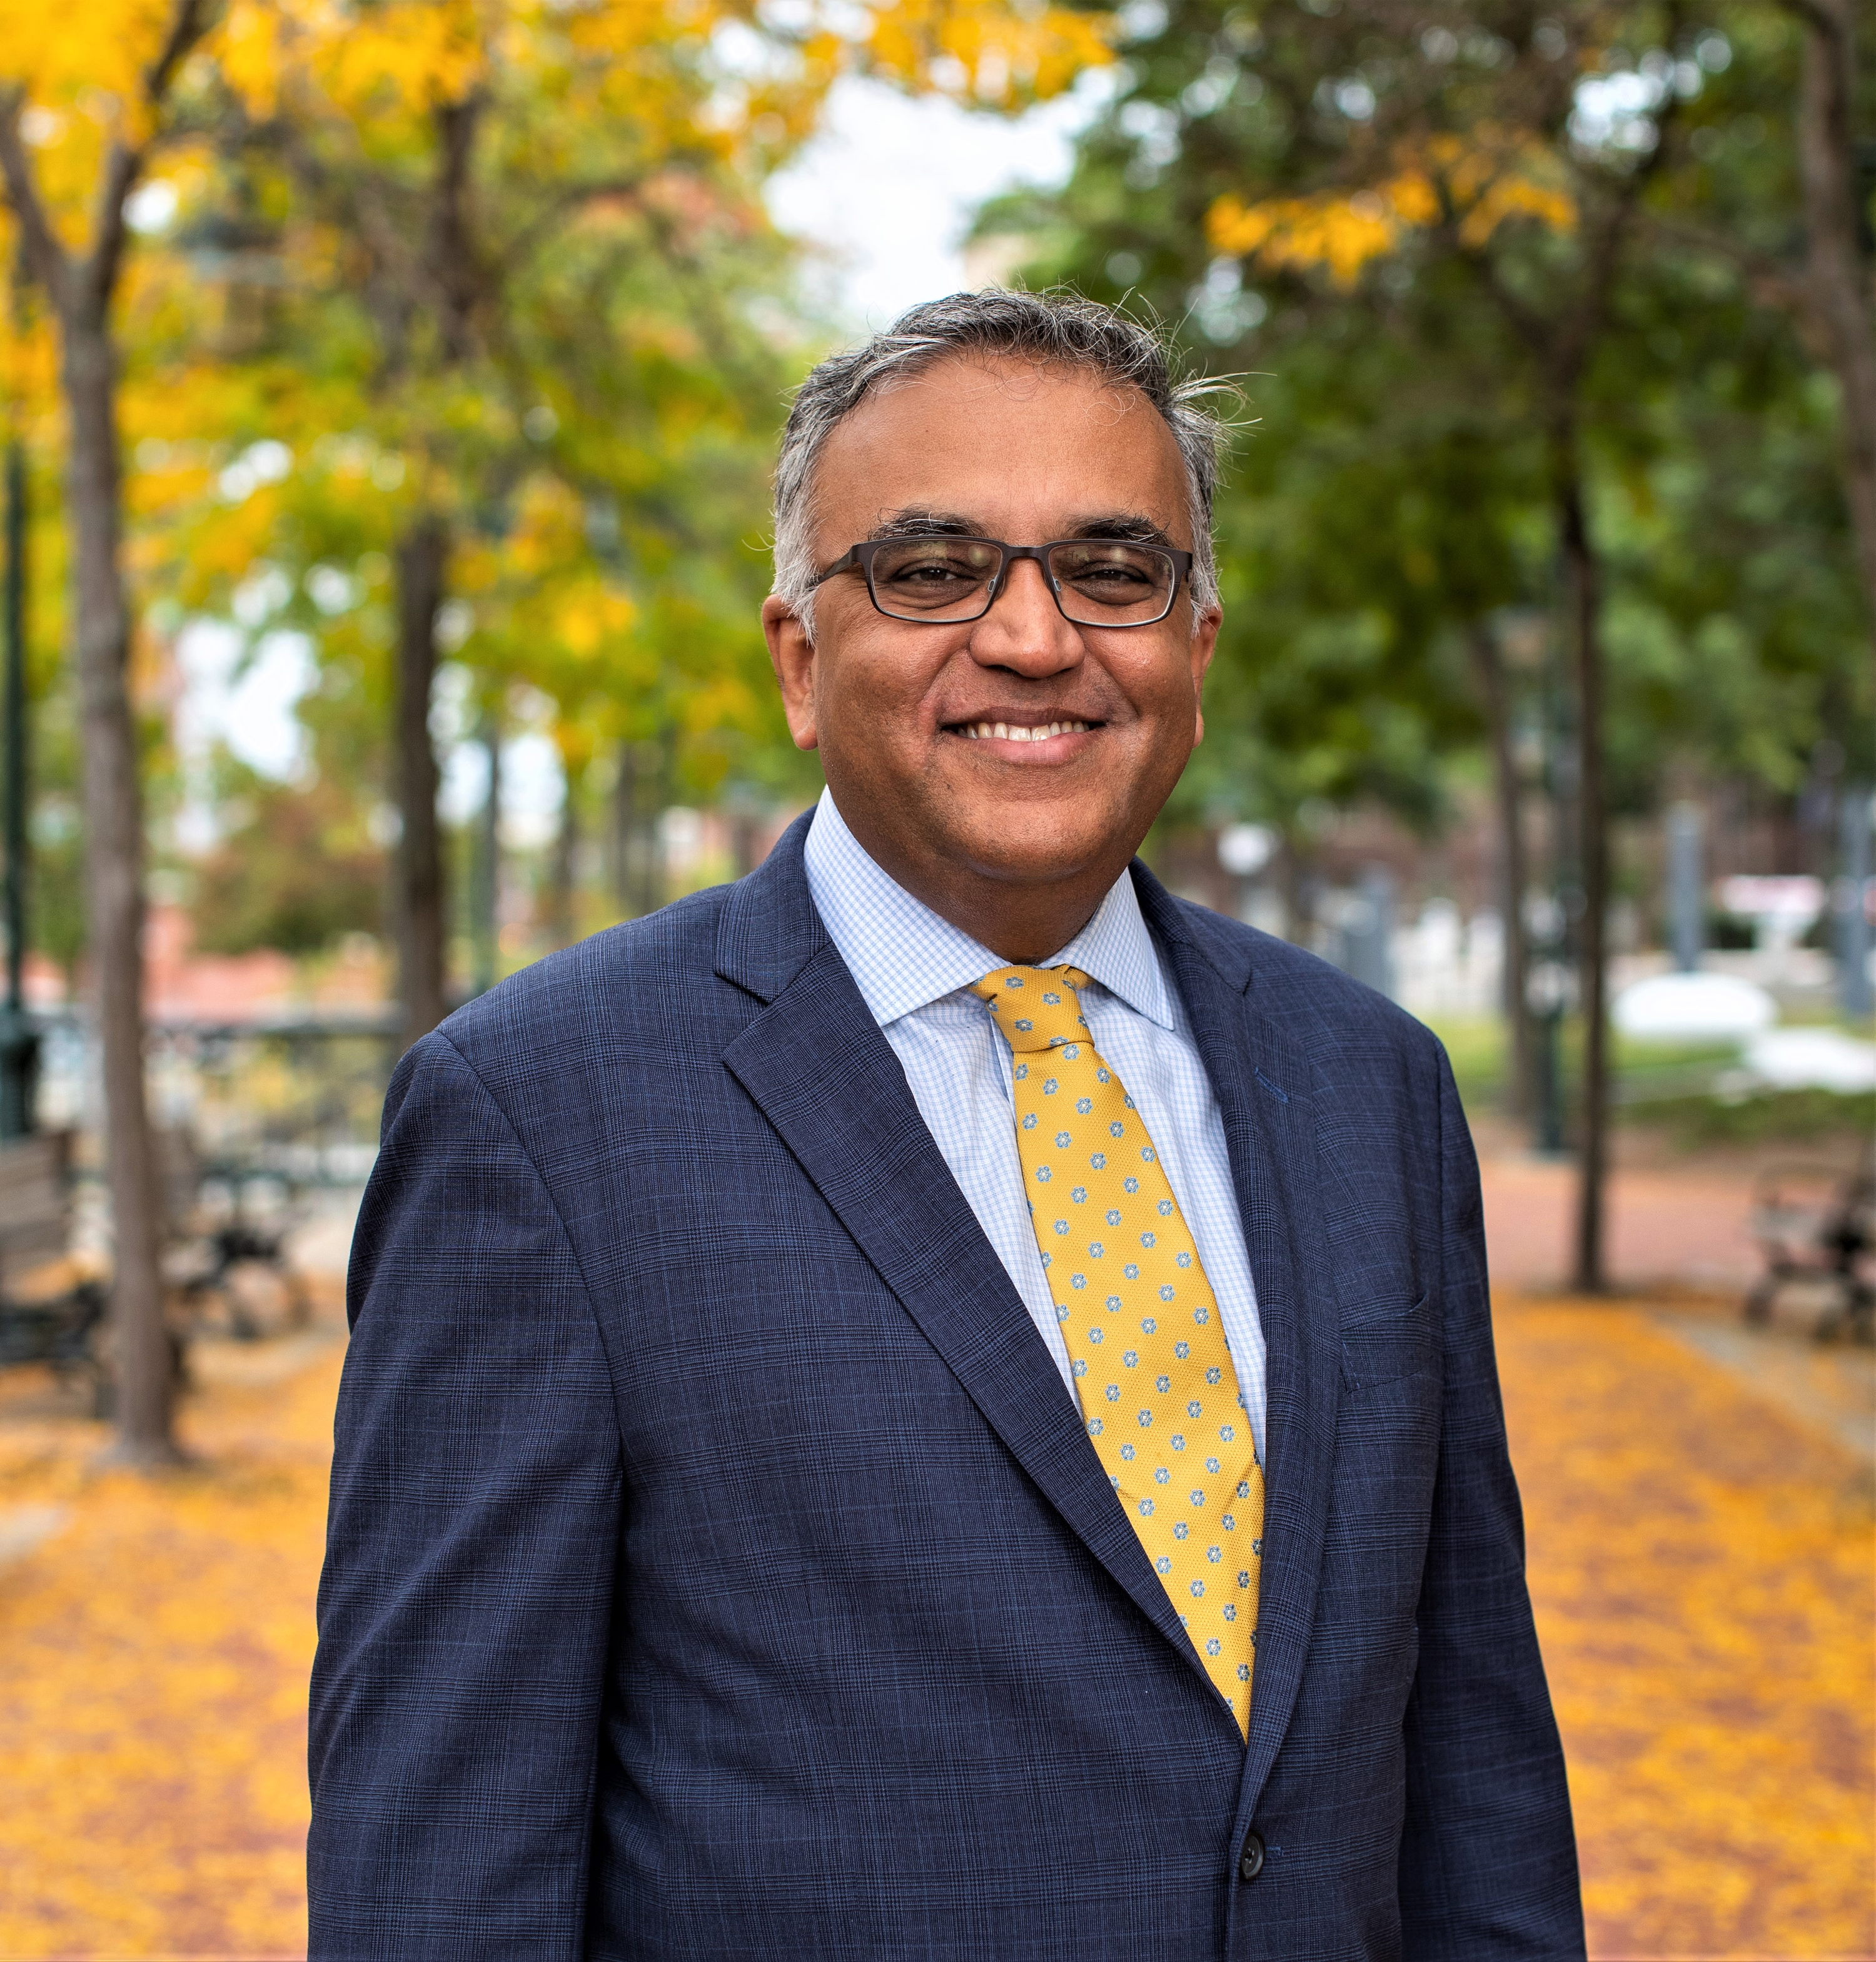 Welcome to Episode 30 of “COVID: What comes next,” an exclusive weekly Providence Journal/USA TODAY NETWORK podcast featuring Dr. Ashish Jha, dean of the Brown University School of Public Health and an internationally respected expert on pandemic response and preparedness.